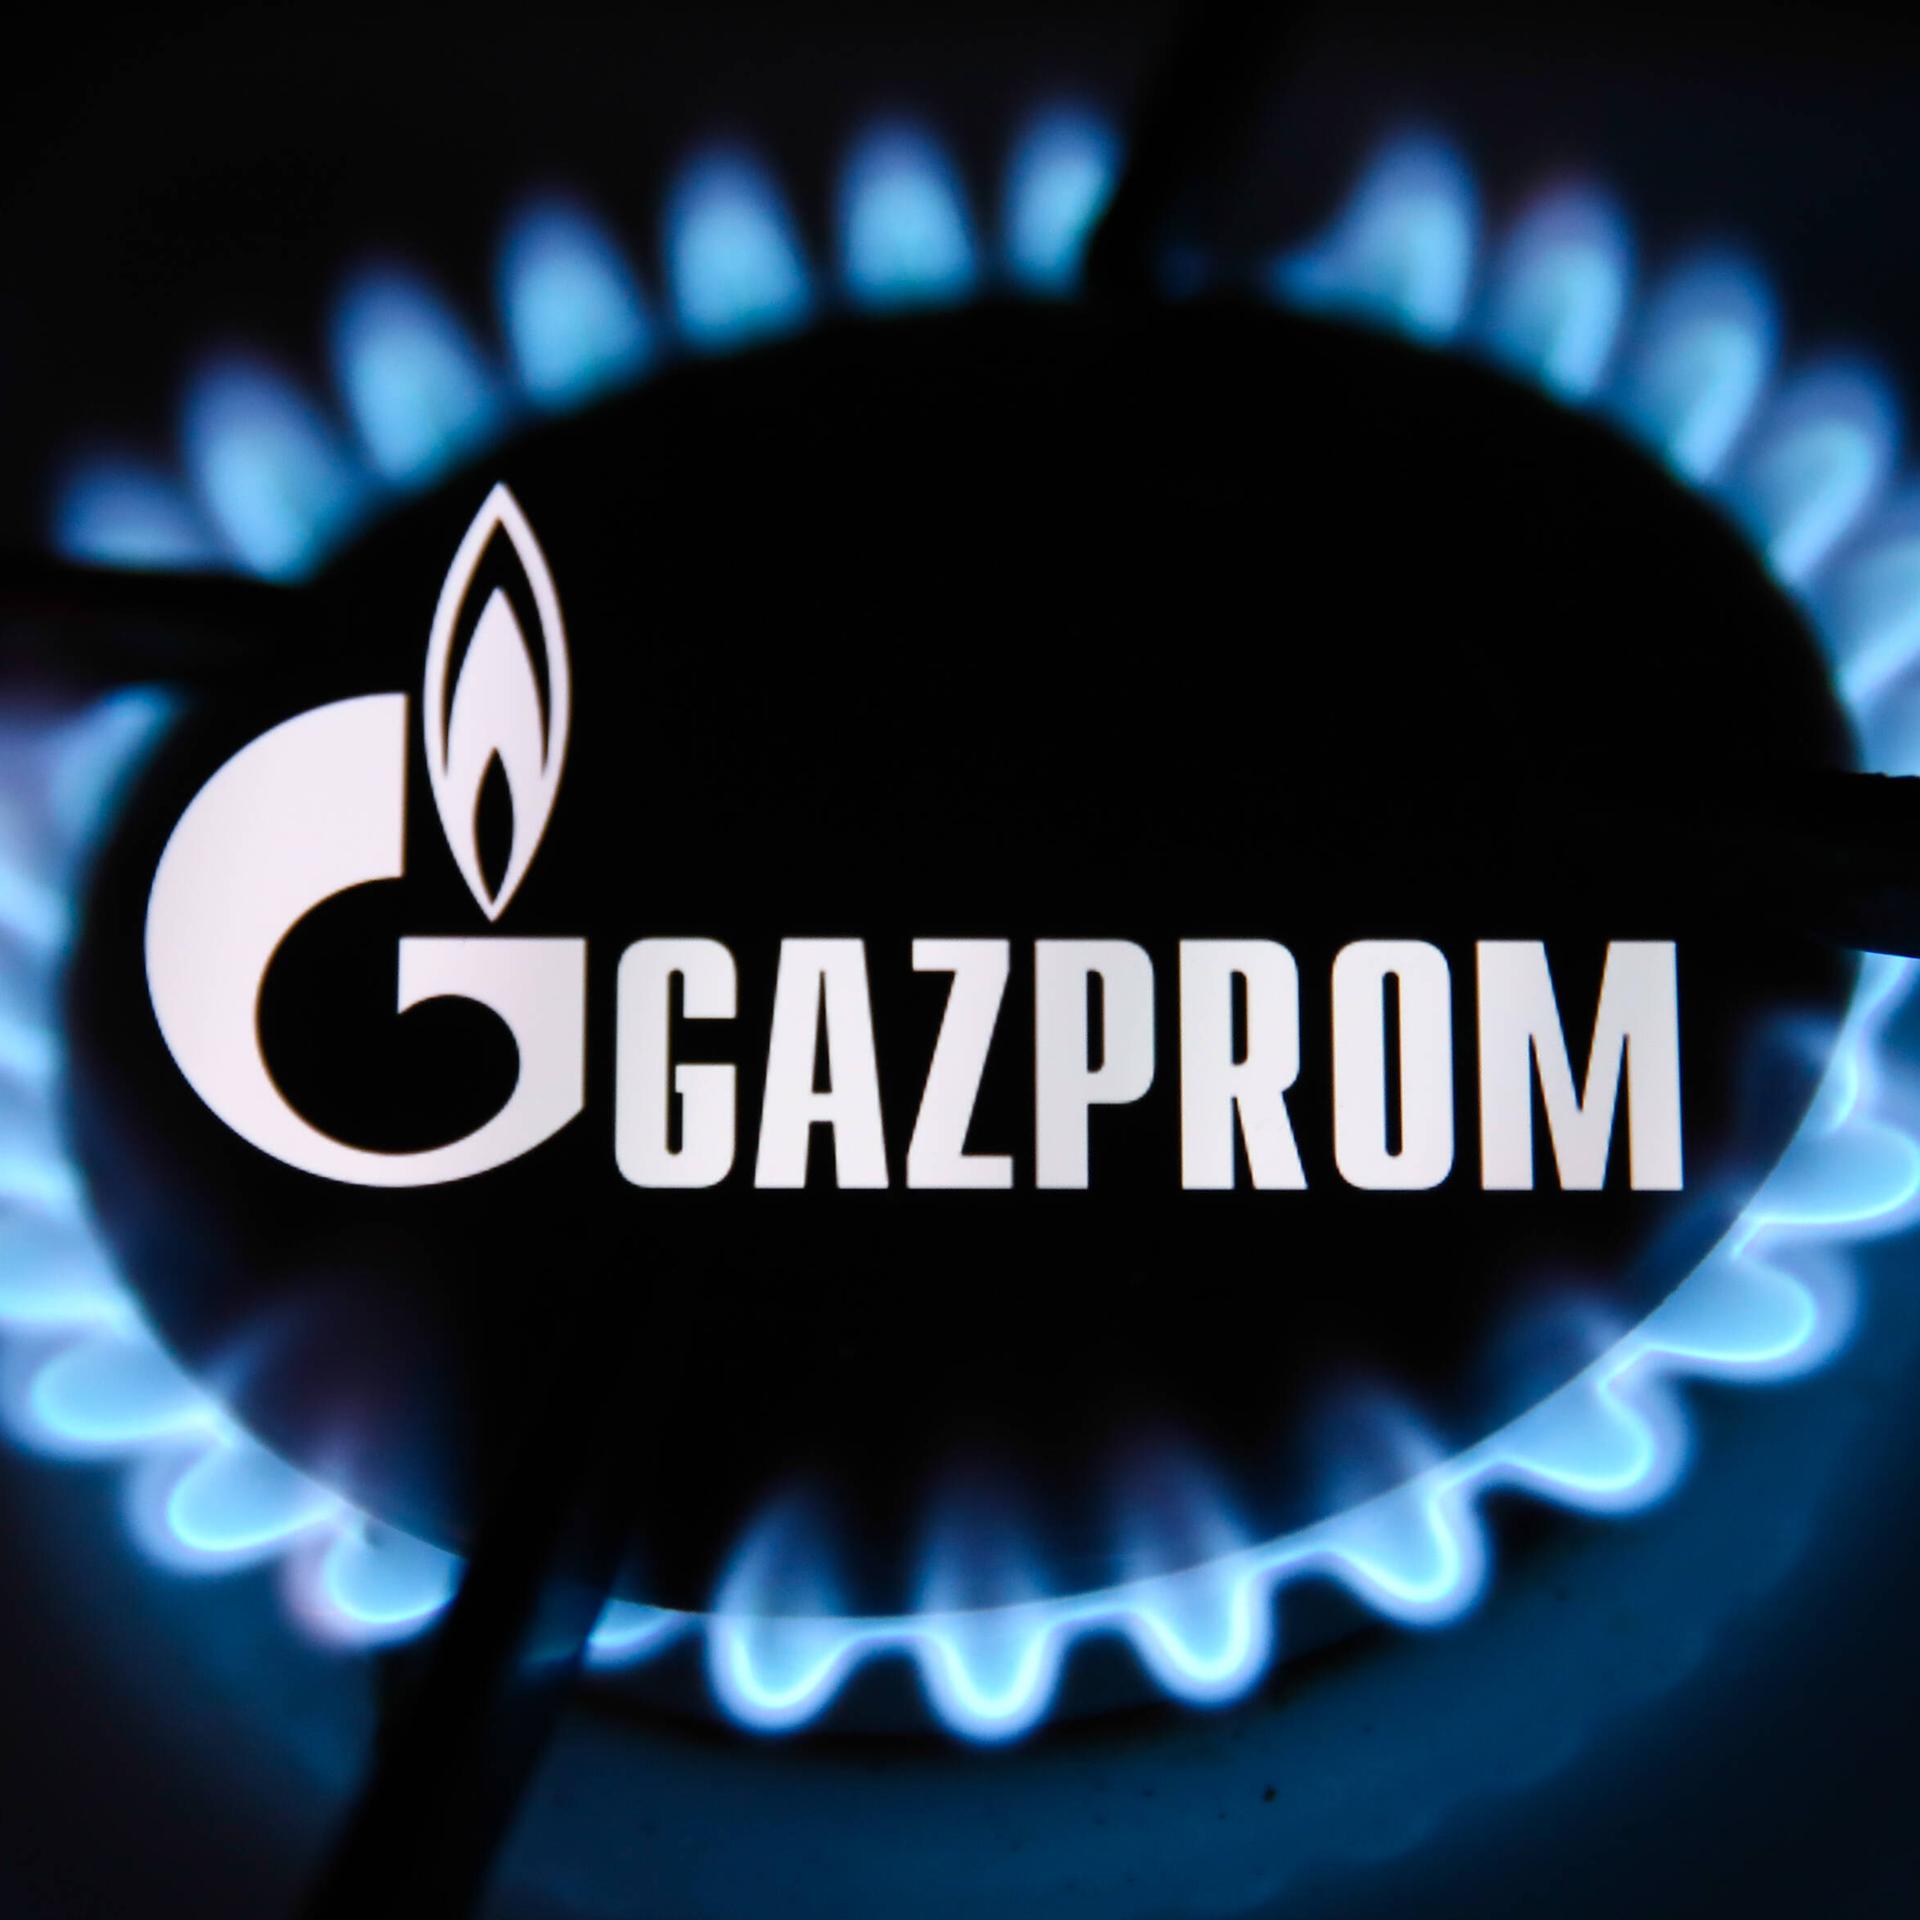 Gazprom Photo Illustrations Gazprom logo displayed on a phone screen and flames from a gas burner are seen in this multi